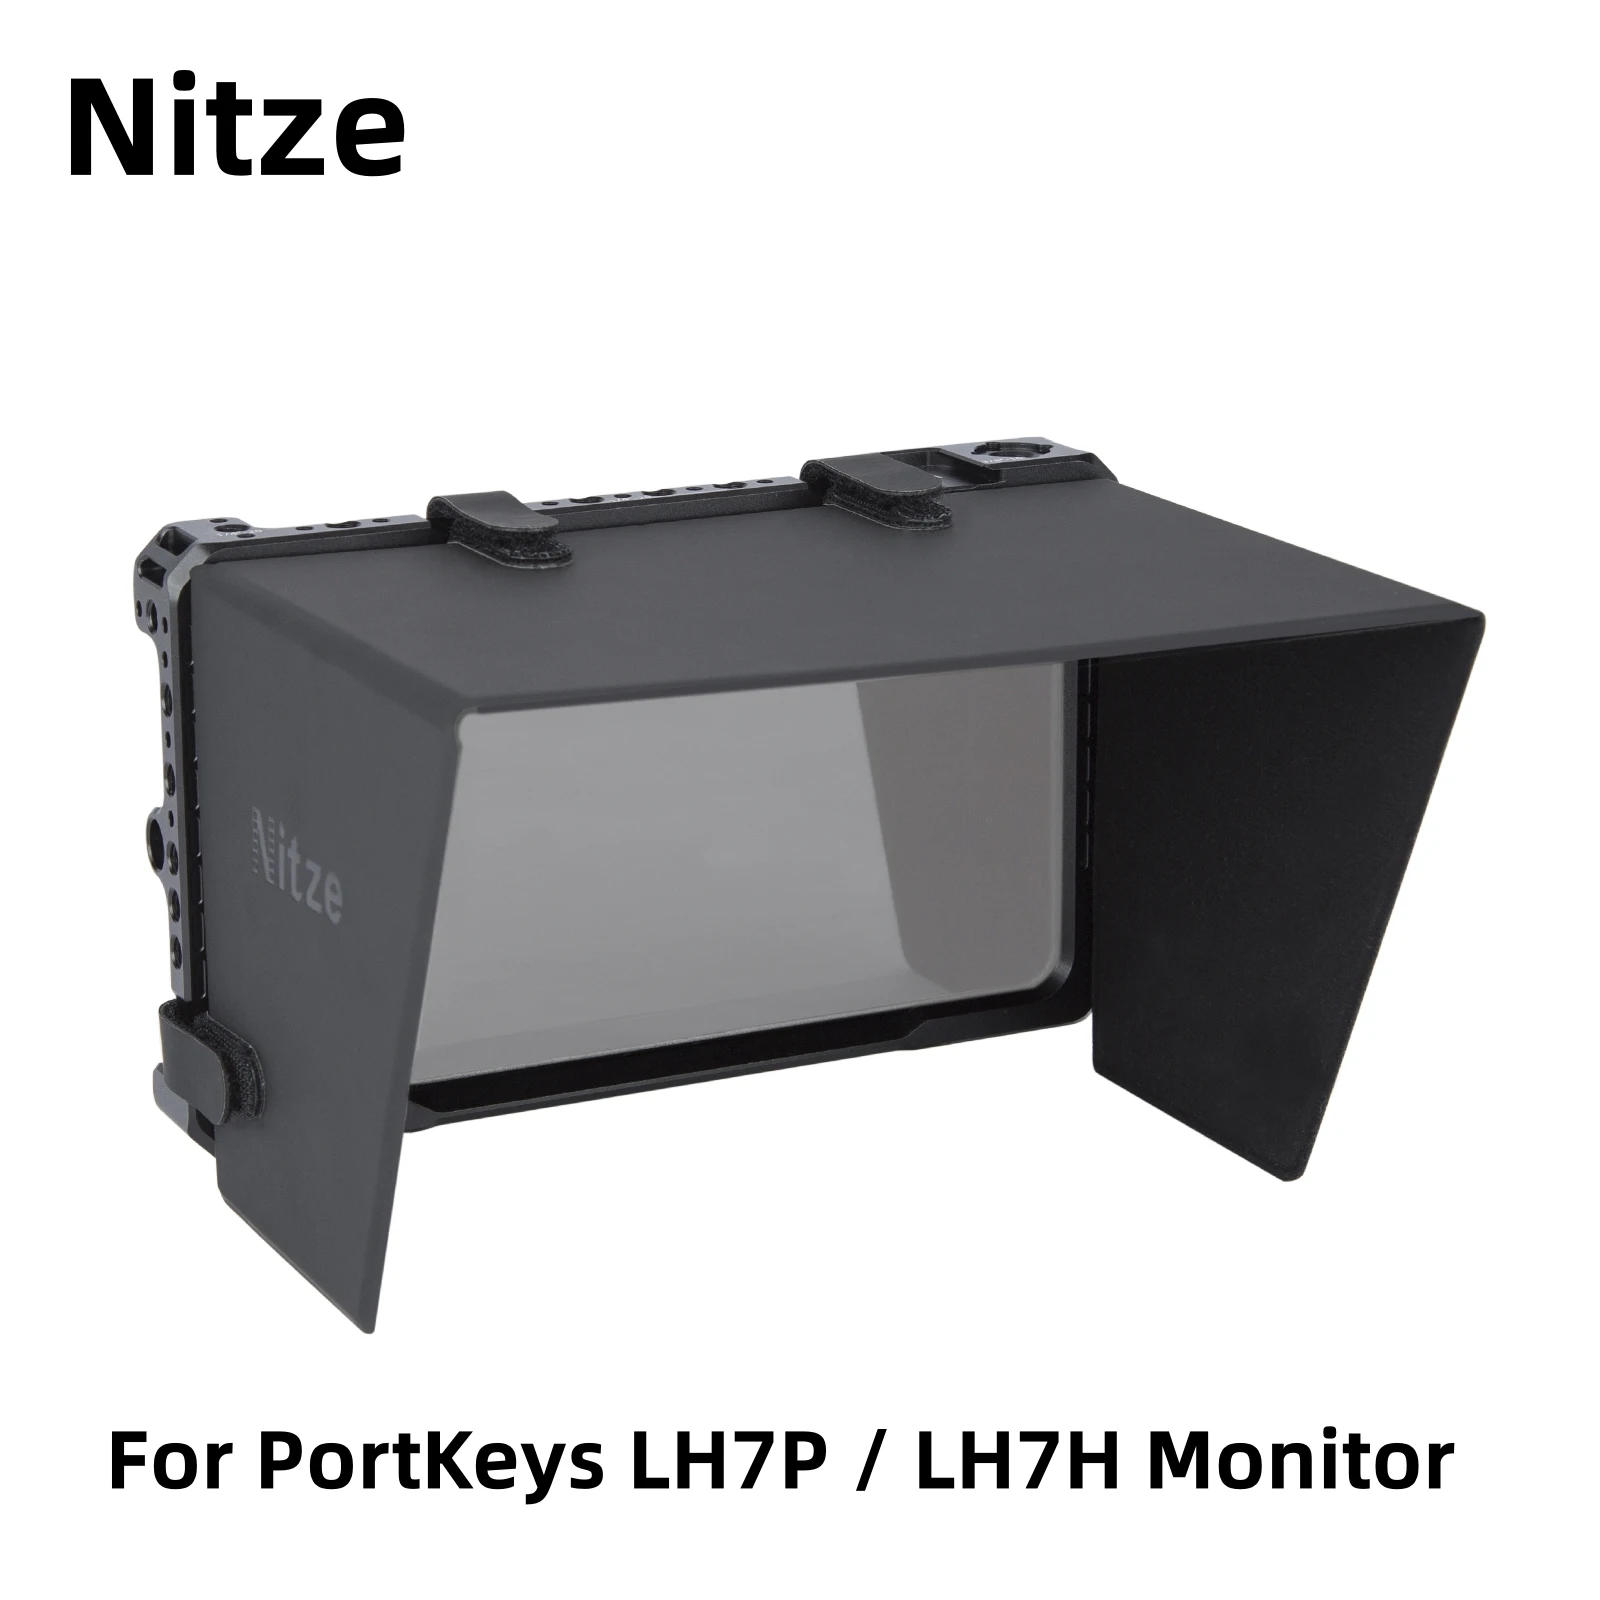 

Nitze Cage for PortKeys LH7P / LH7H Monitor with PU Leather Sunhood - JT-I03B